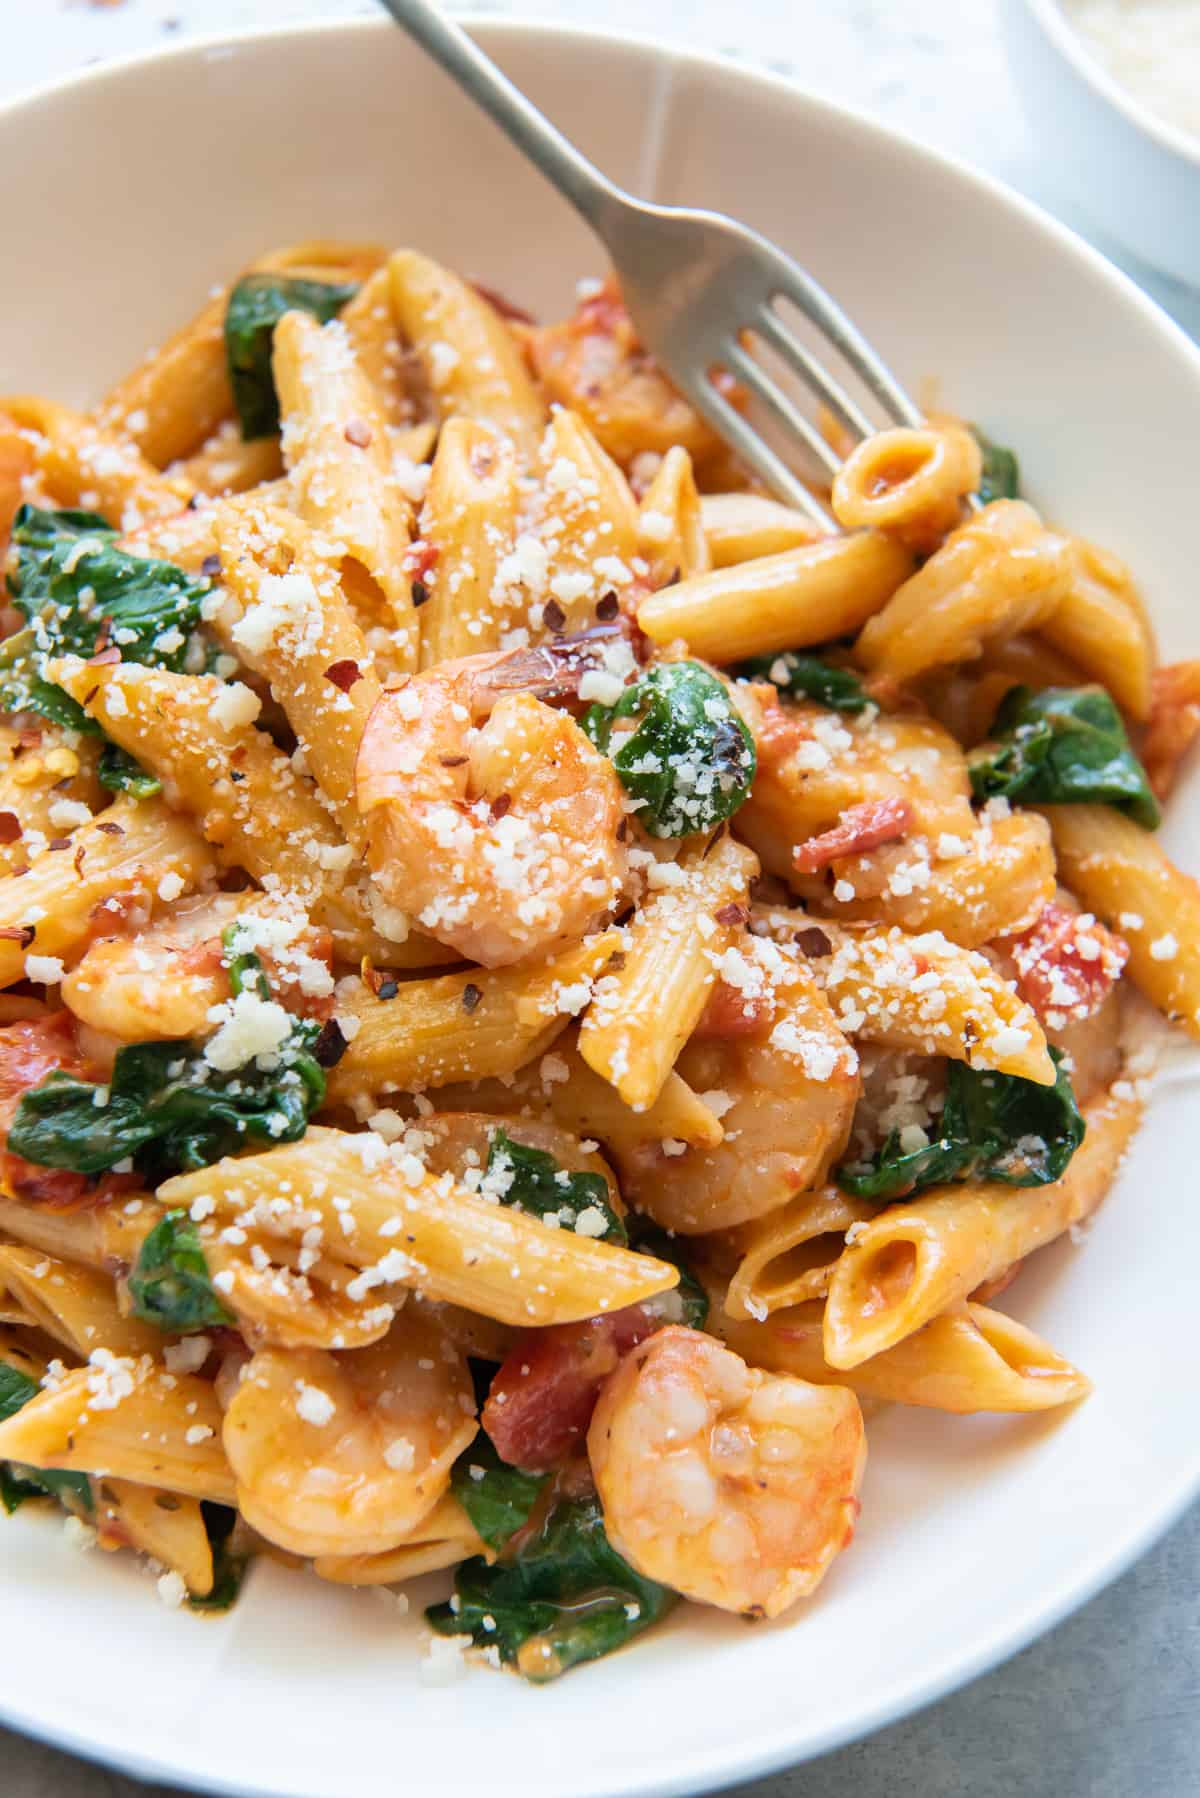 A close up of a bowl of shrimp and spinach pasta with a fork.